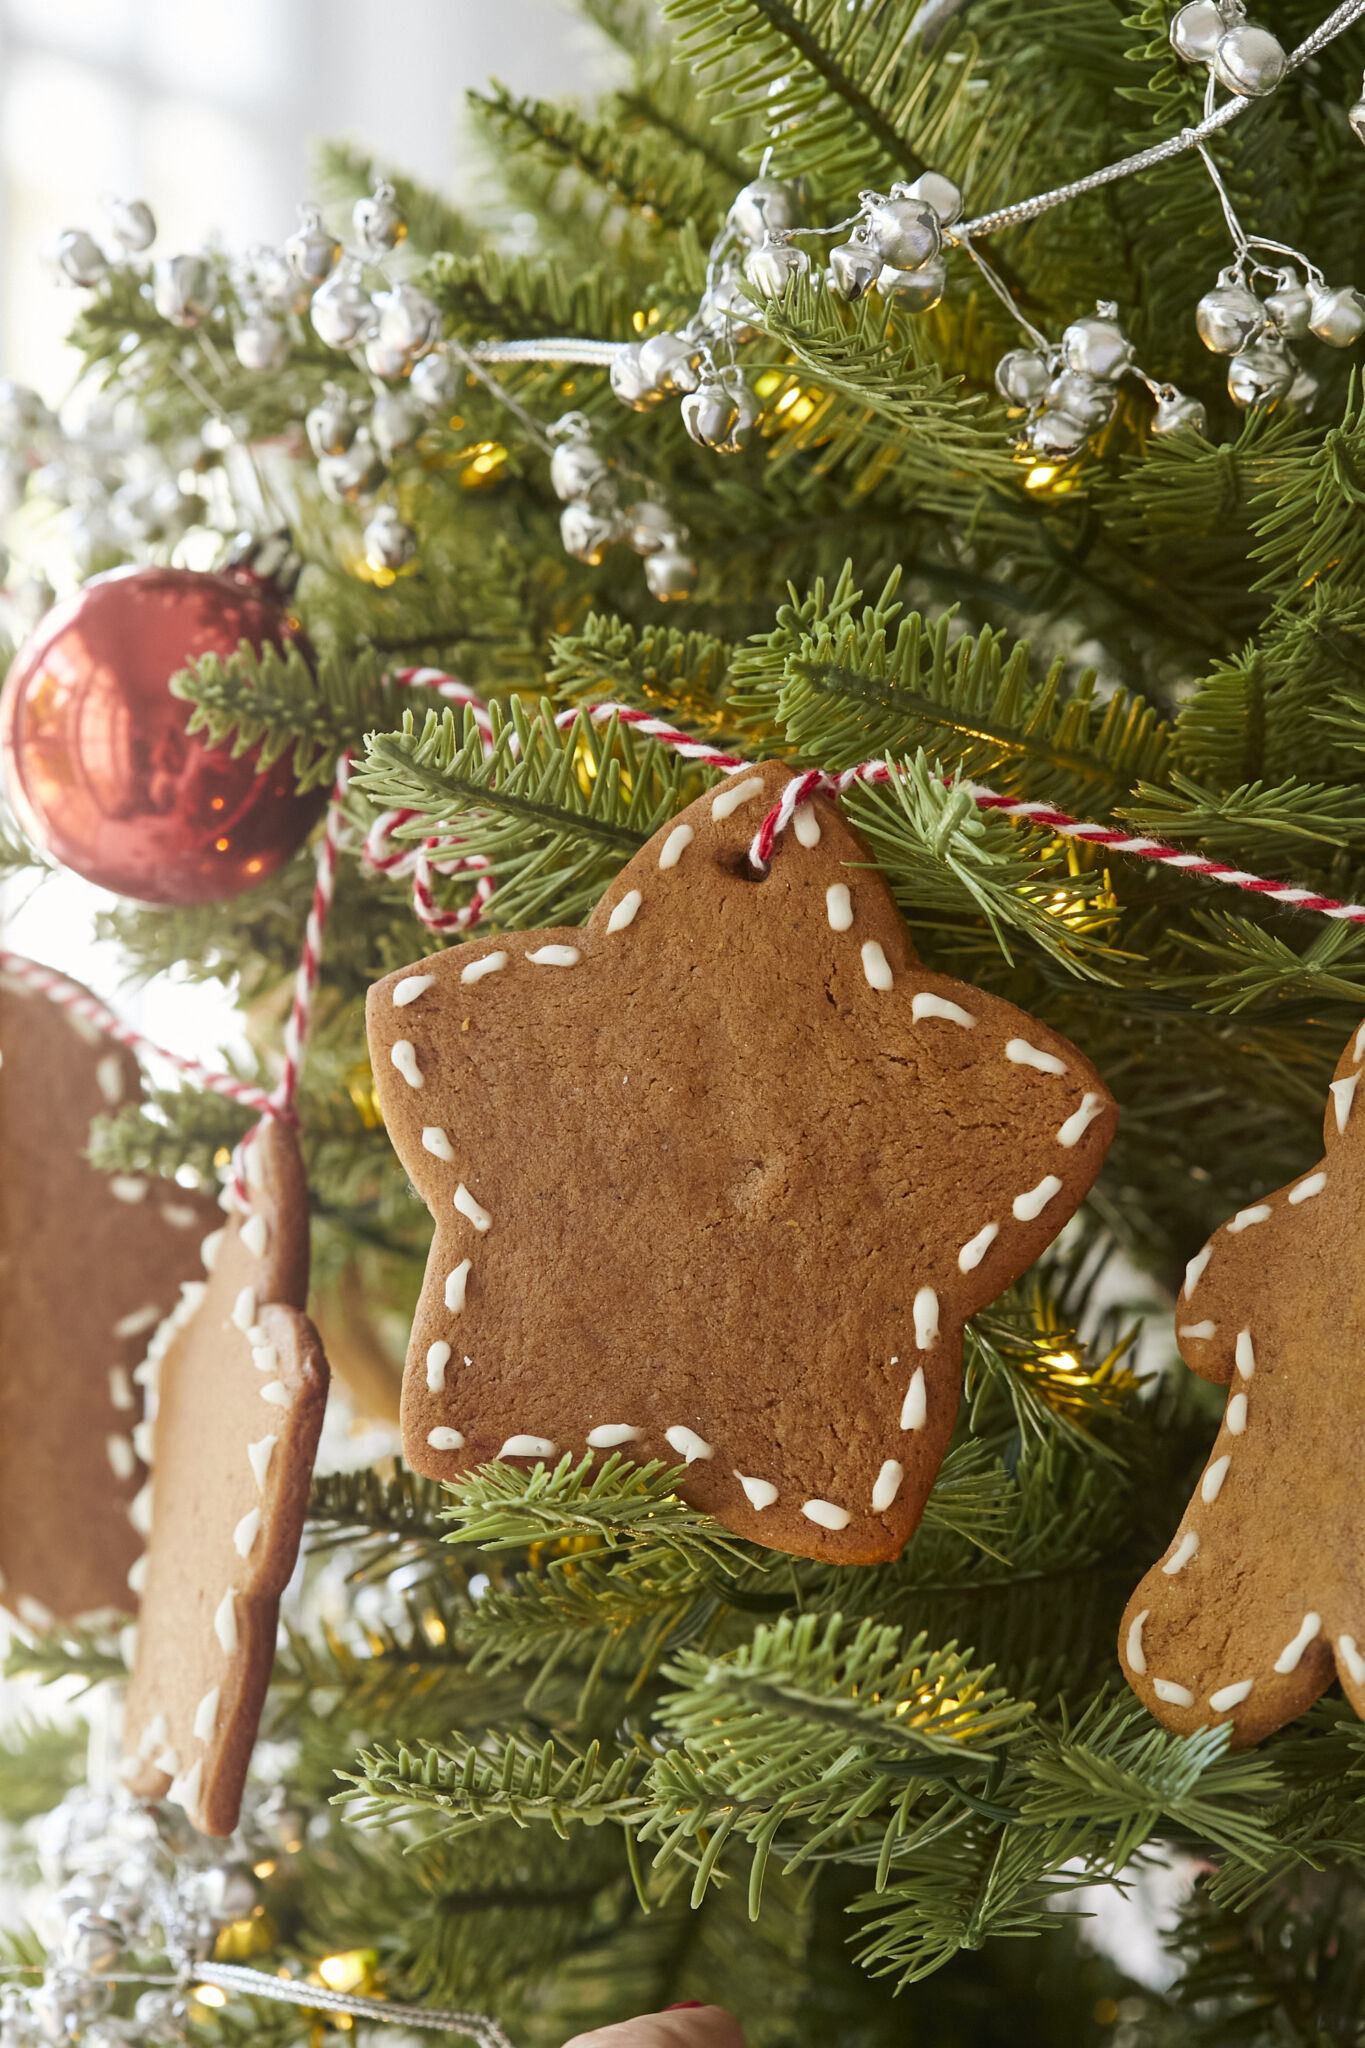 Golden brown Gingerbread Garland Cookies are hung on the Christmas tree. They are iced on the edge with white frosting, form a nice color contrast with the red ornament, green branches, and silver lights. 